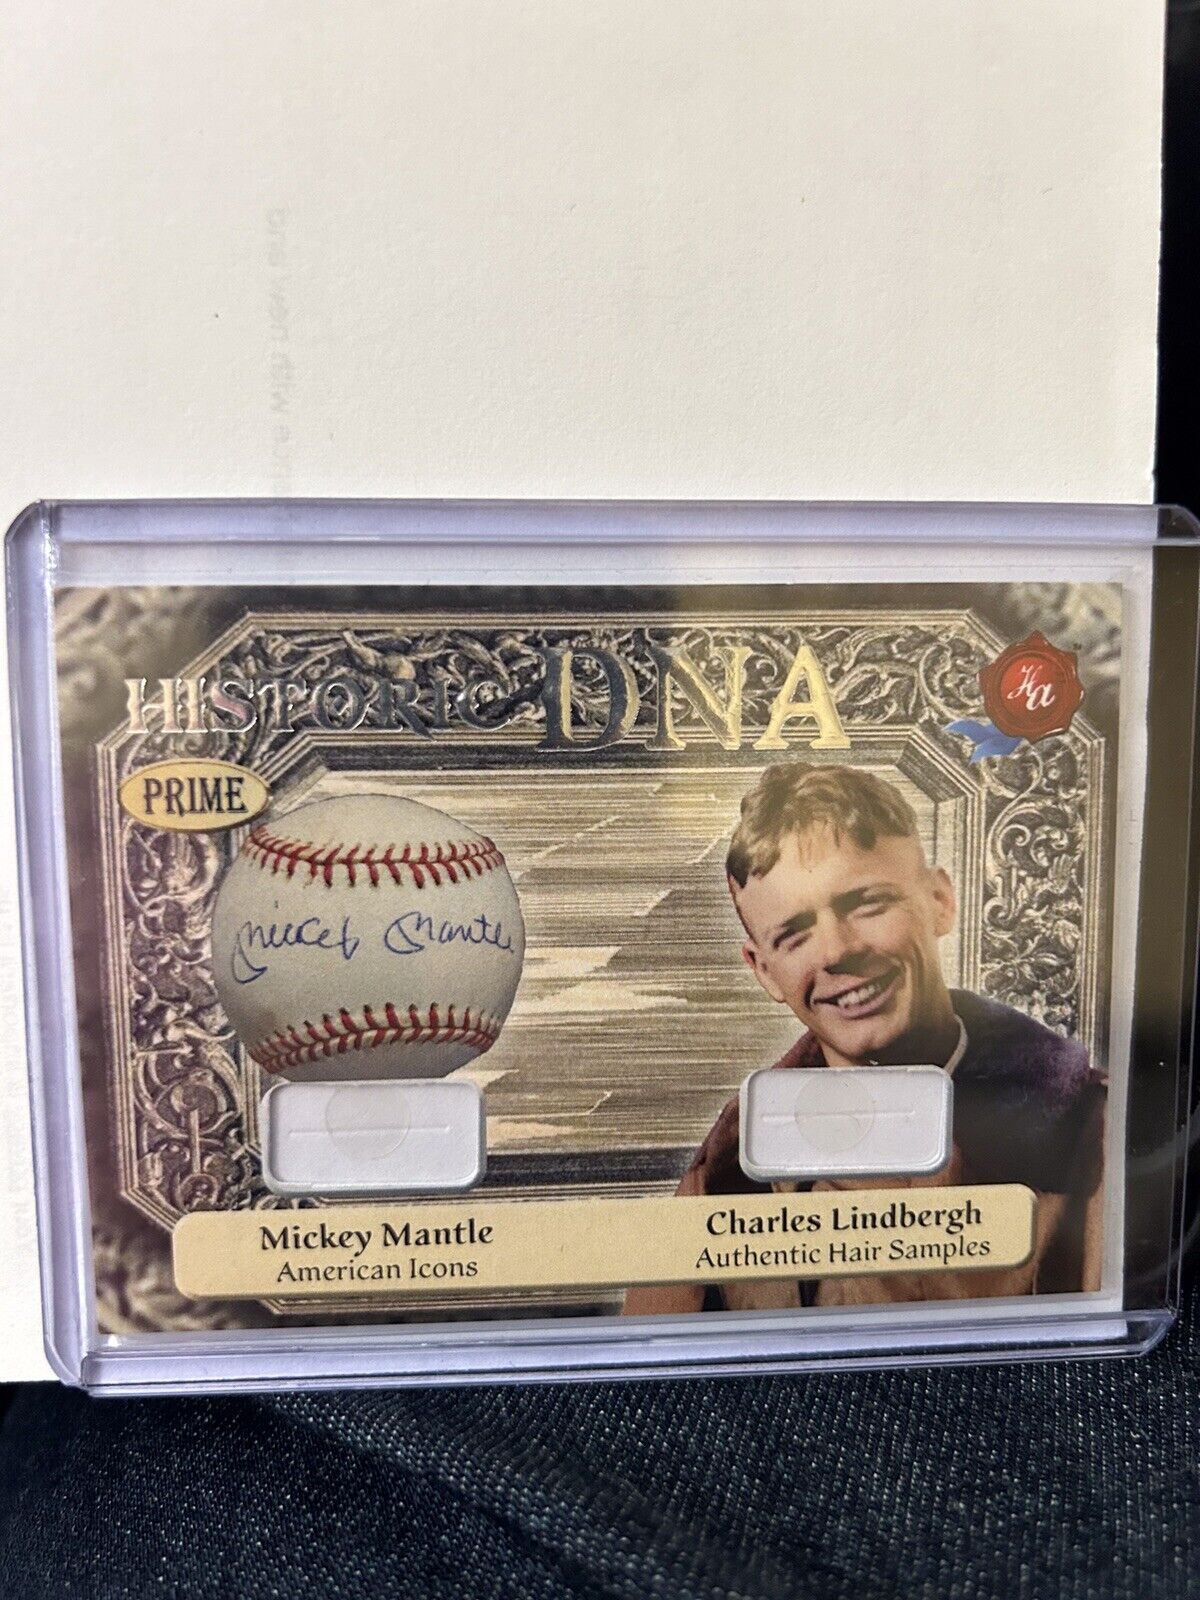 Historic Dna Prime Two Mickey Mantle And Charles Lindbergh 4/5